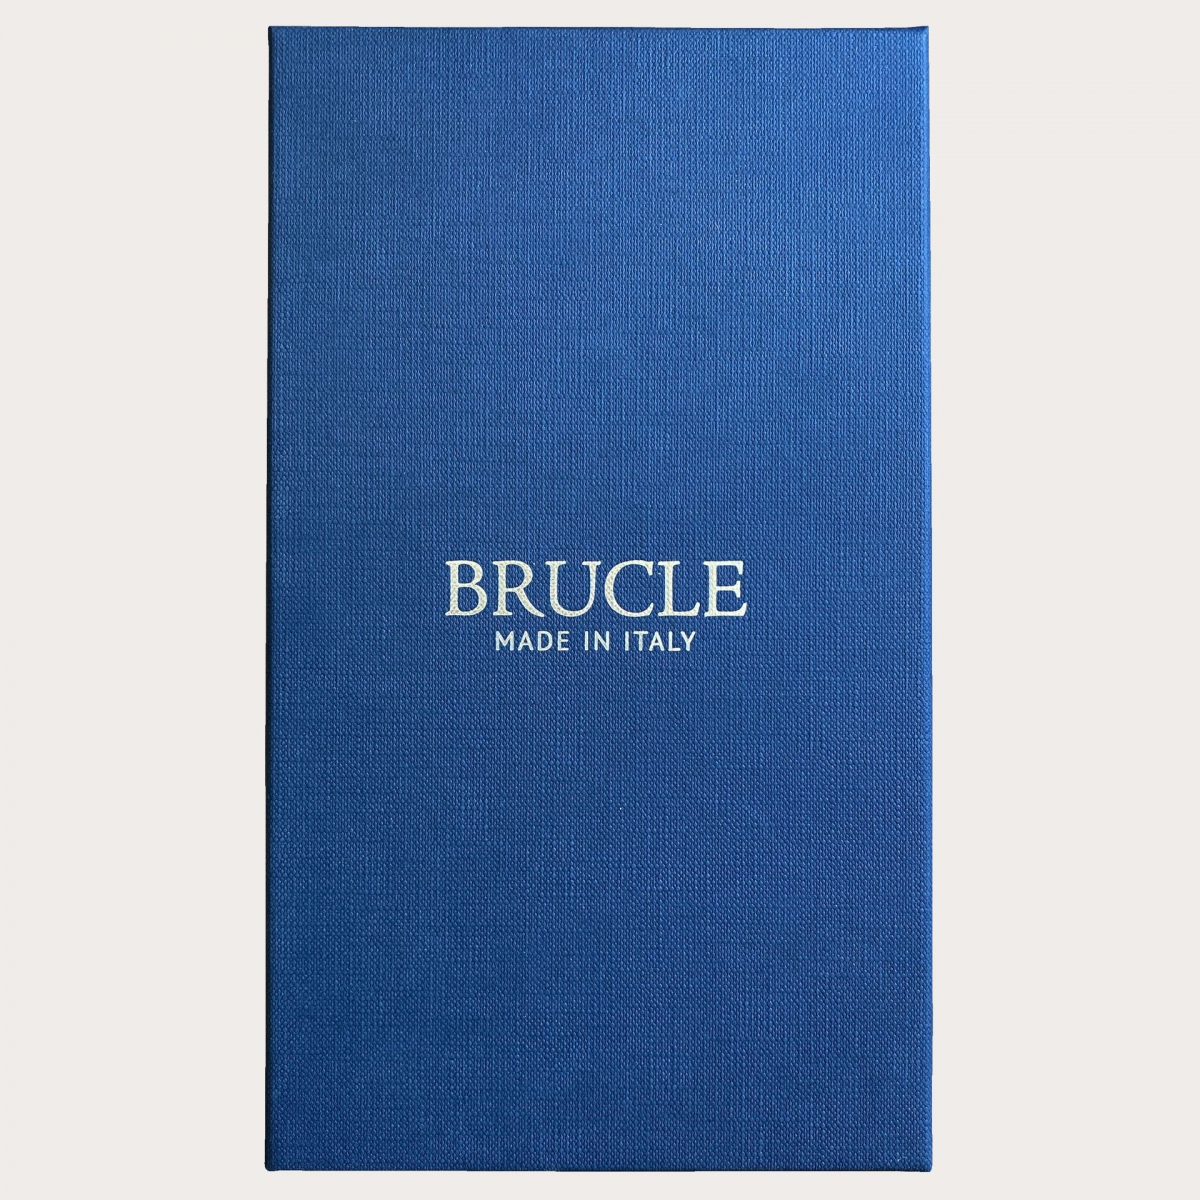 BRUCLE X-shaped suspenders with clips in brown and blue cashmere pattern